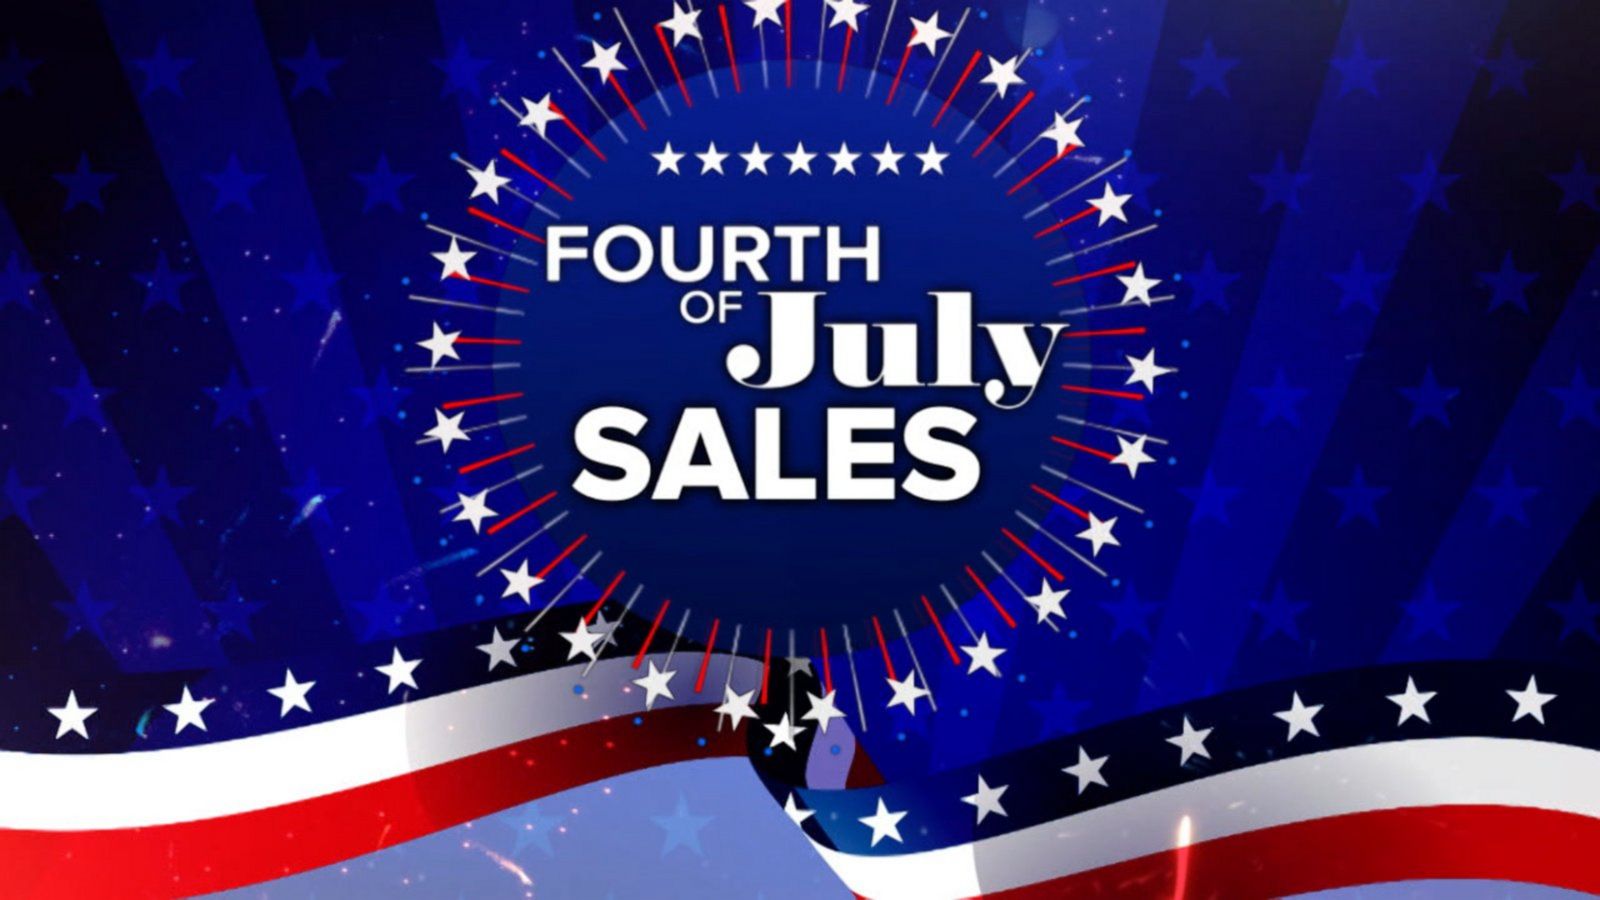 VIDEO: Shopping for July Fourth sales